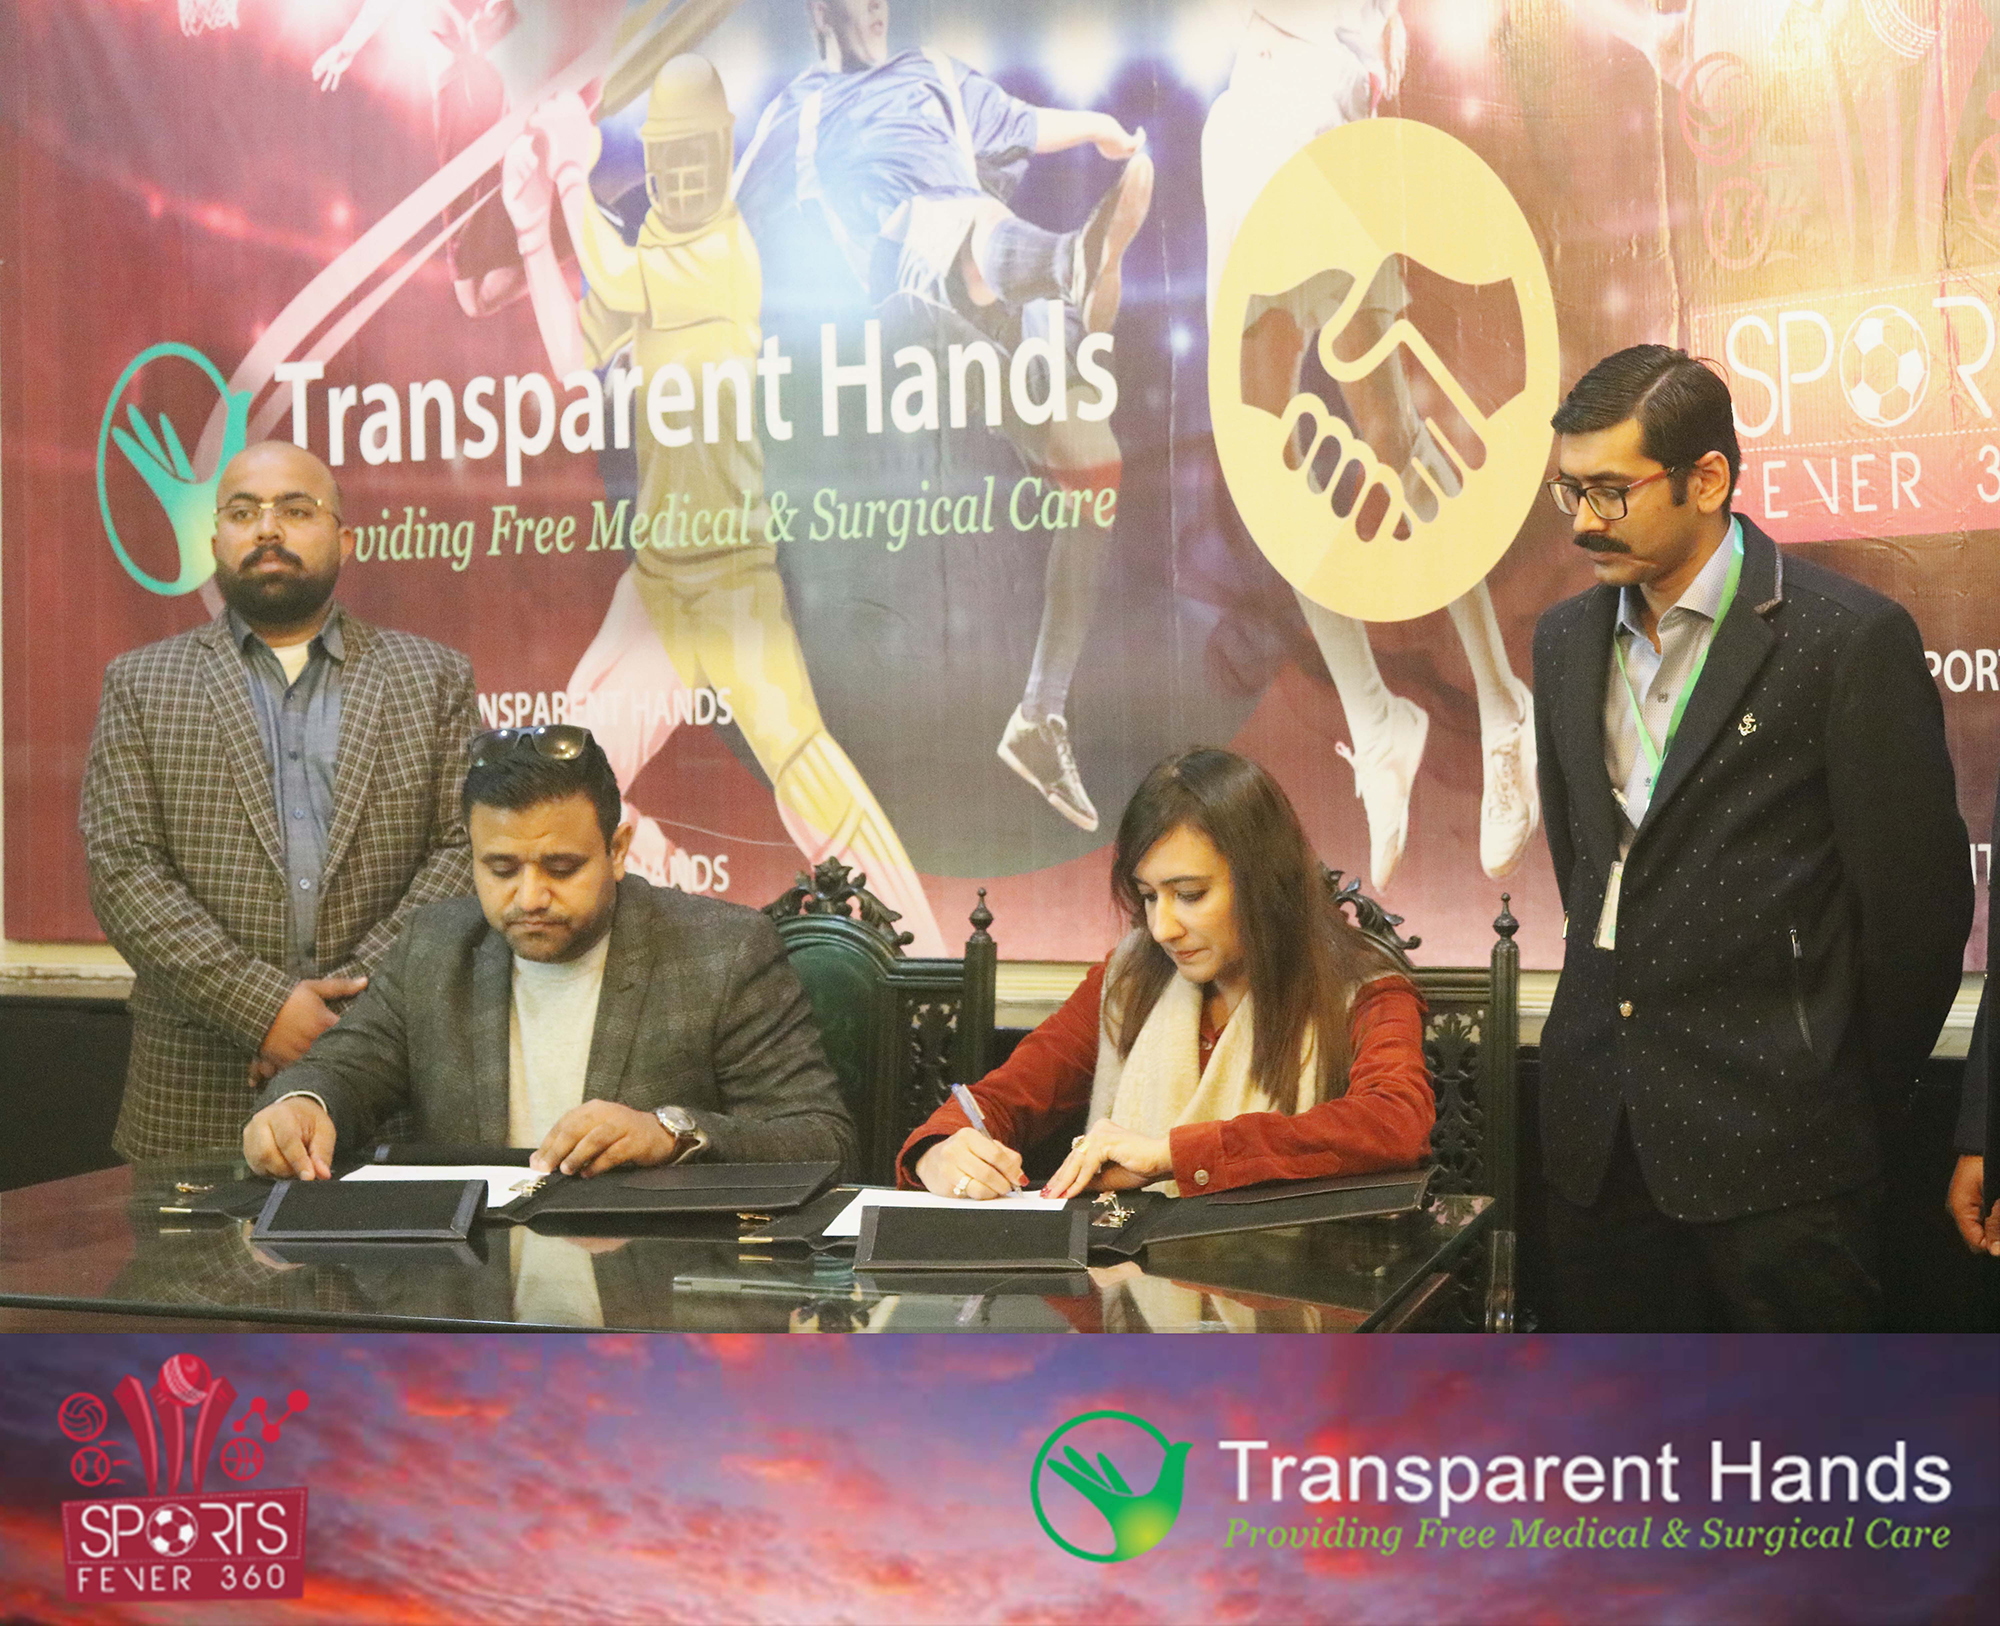 mou signing between two organizations